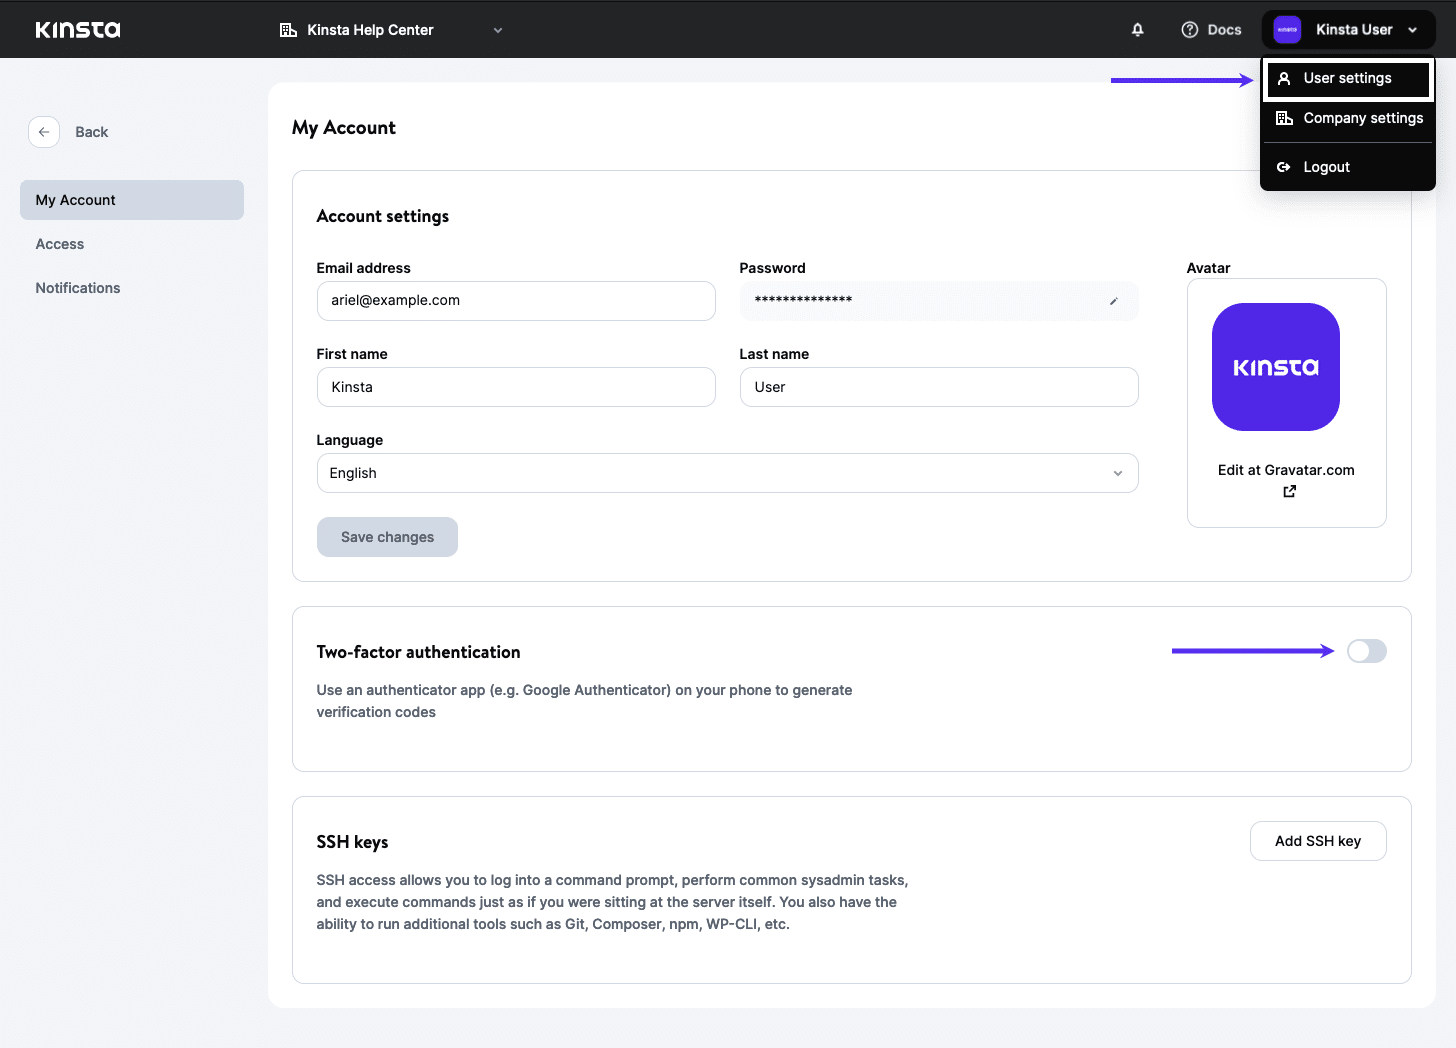 Enable two-factor authentication in MyKinsta.